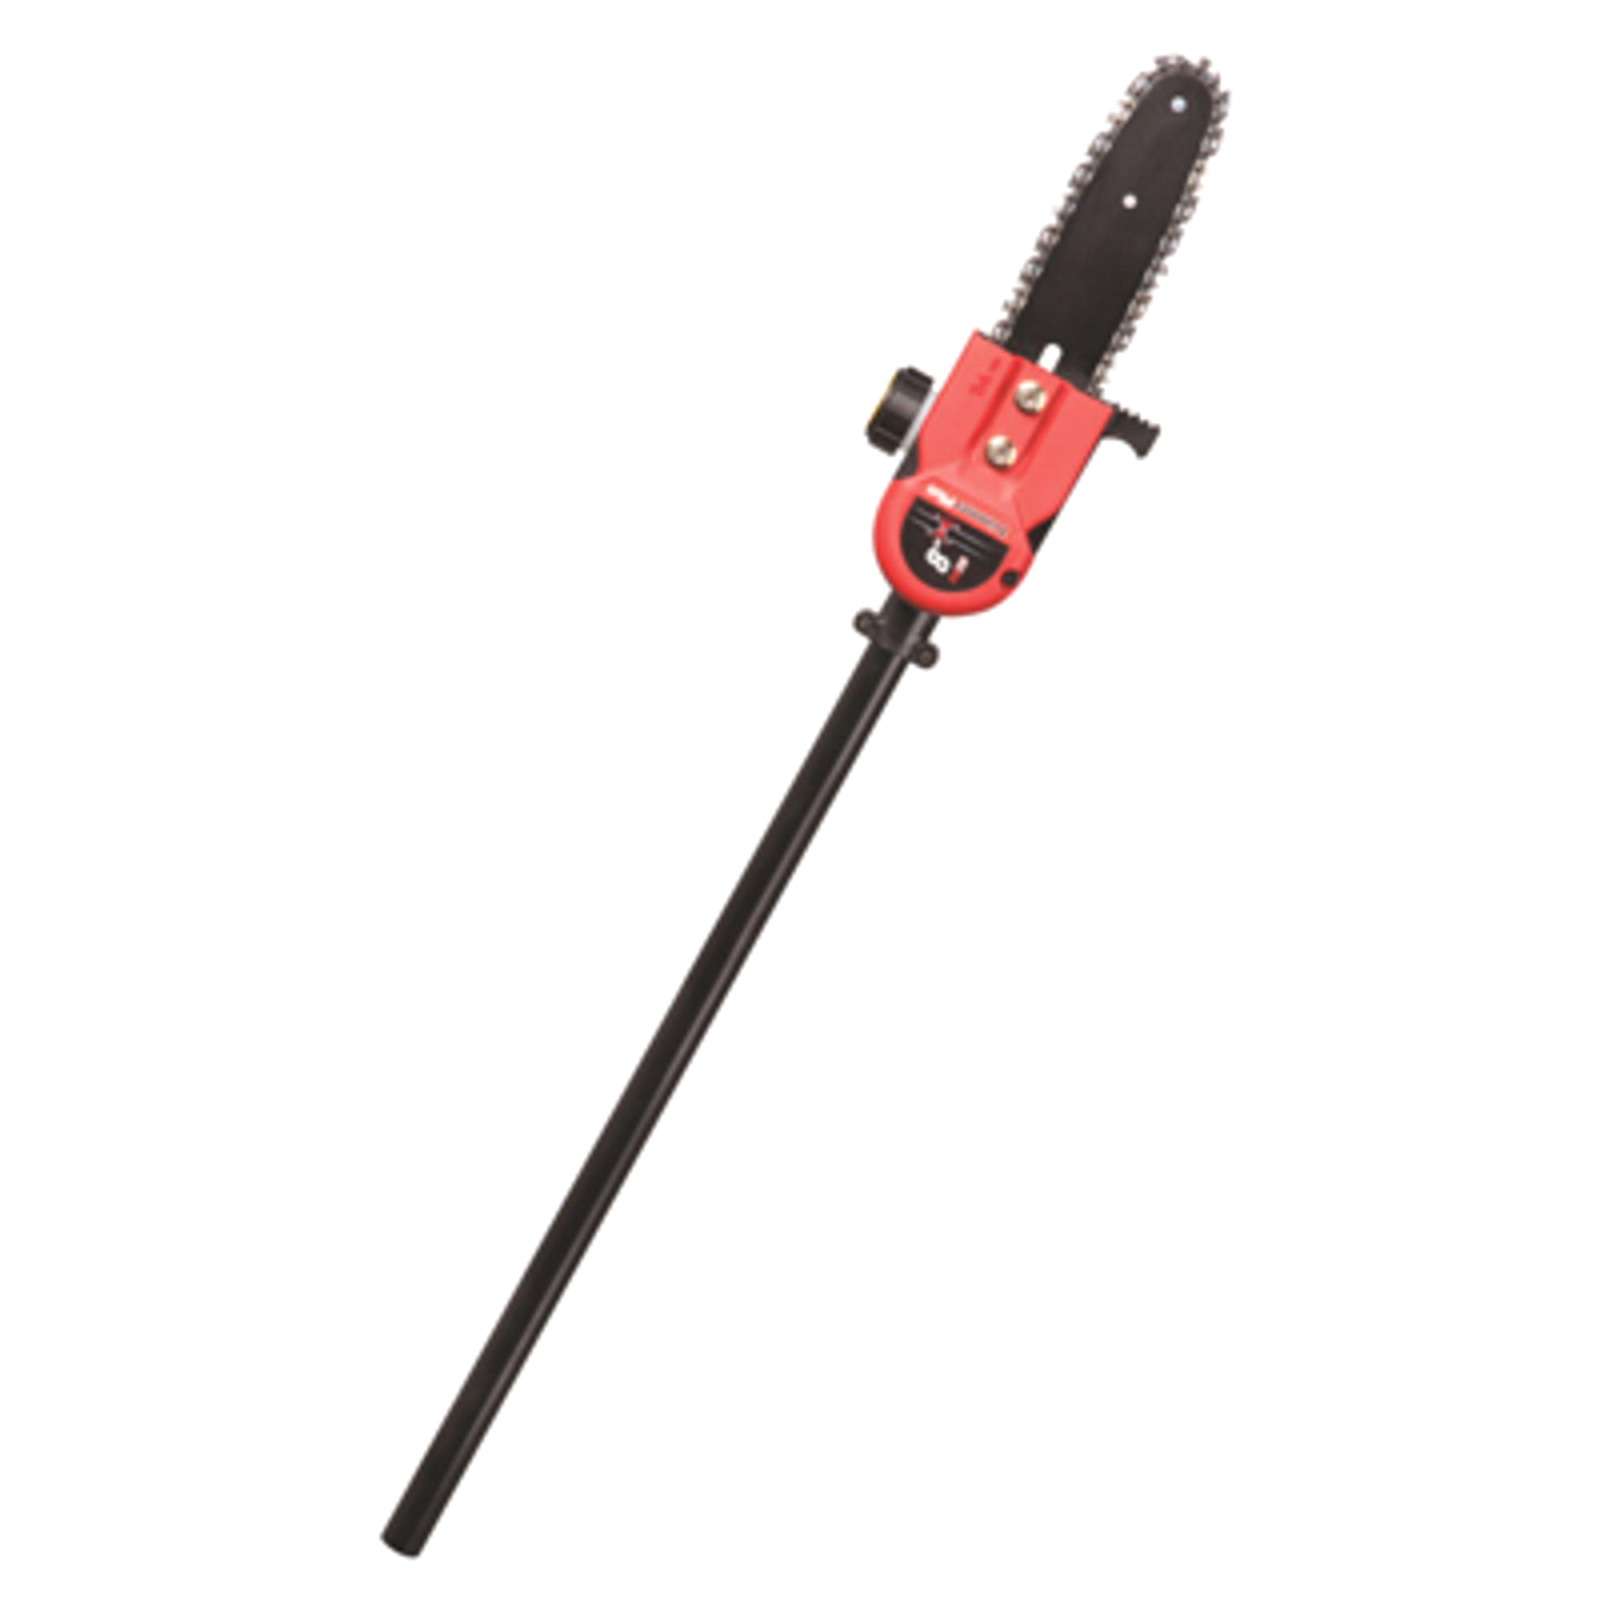 Troy-Bilt 41AJPSC902 PS720 Pole Saw Attachment with 8" Bar and Chain